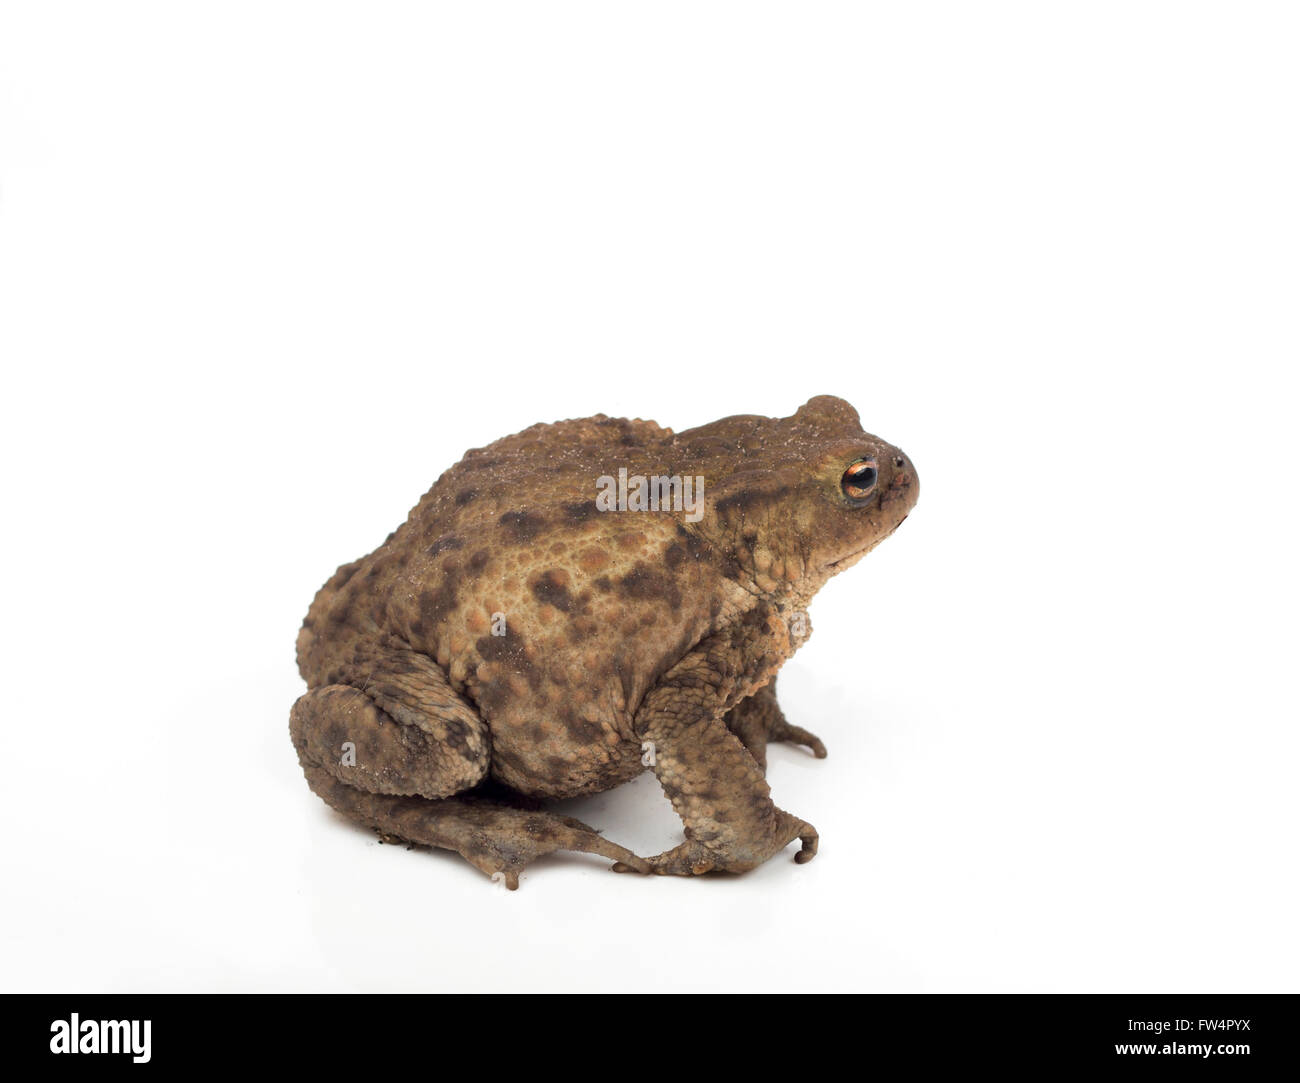 Hoptoad isolated on white background studio Banque D'Images